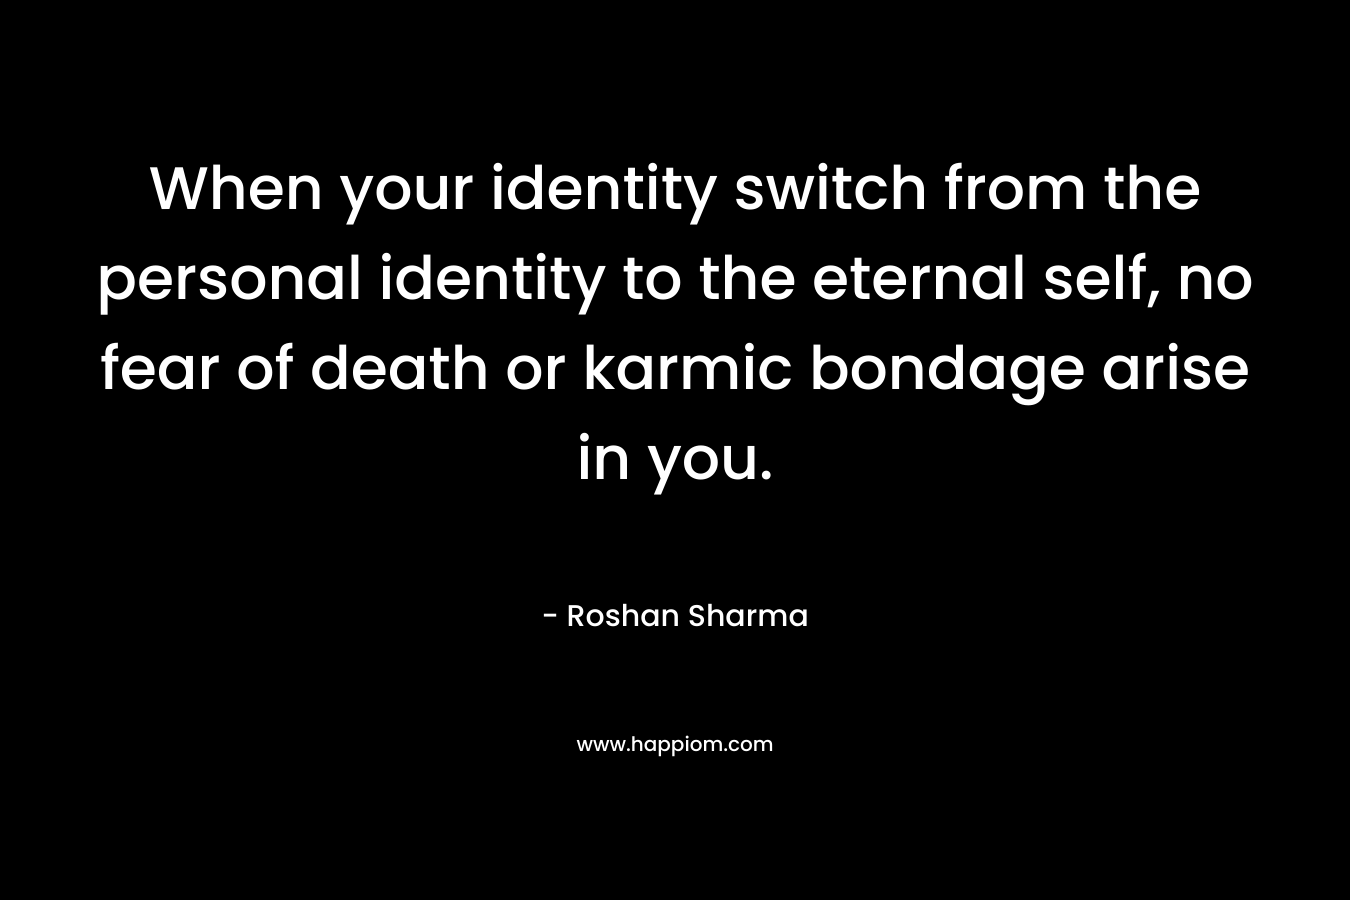 When your identity switch from the personal identity to the eternal self, no fear of death or karmic bondage arise in you. – Roshan Sharma